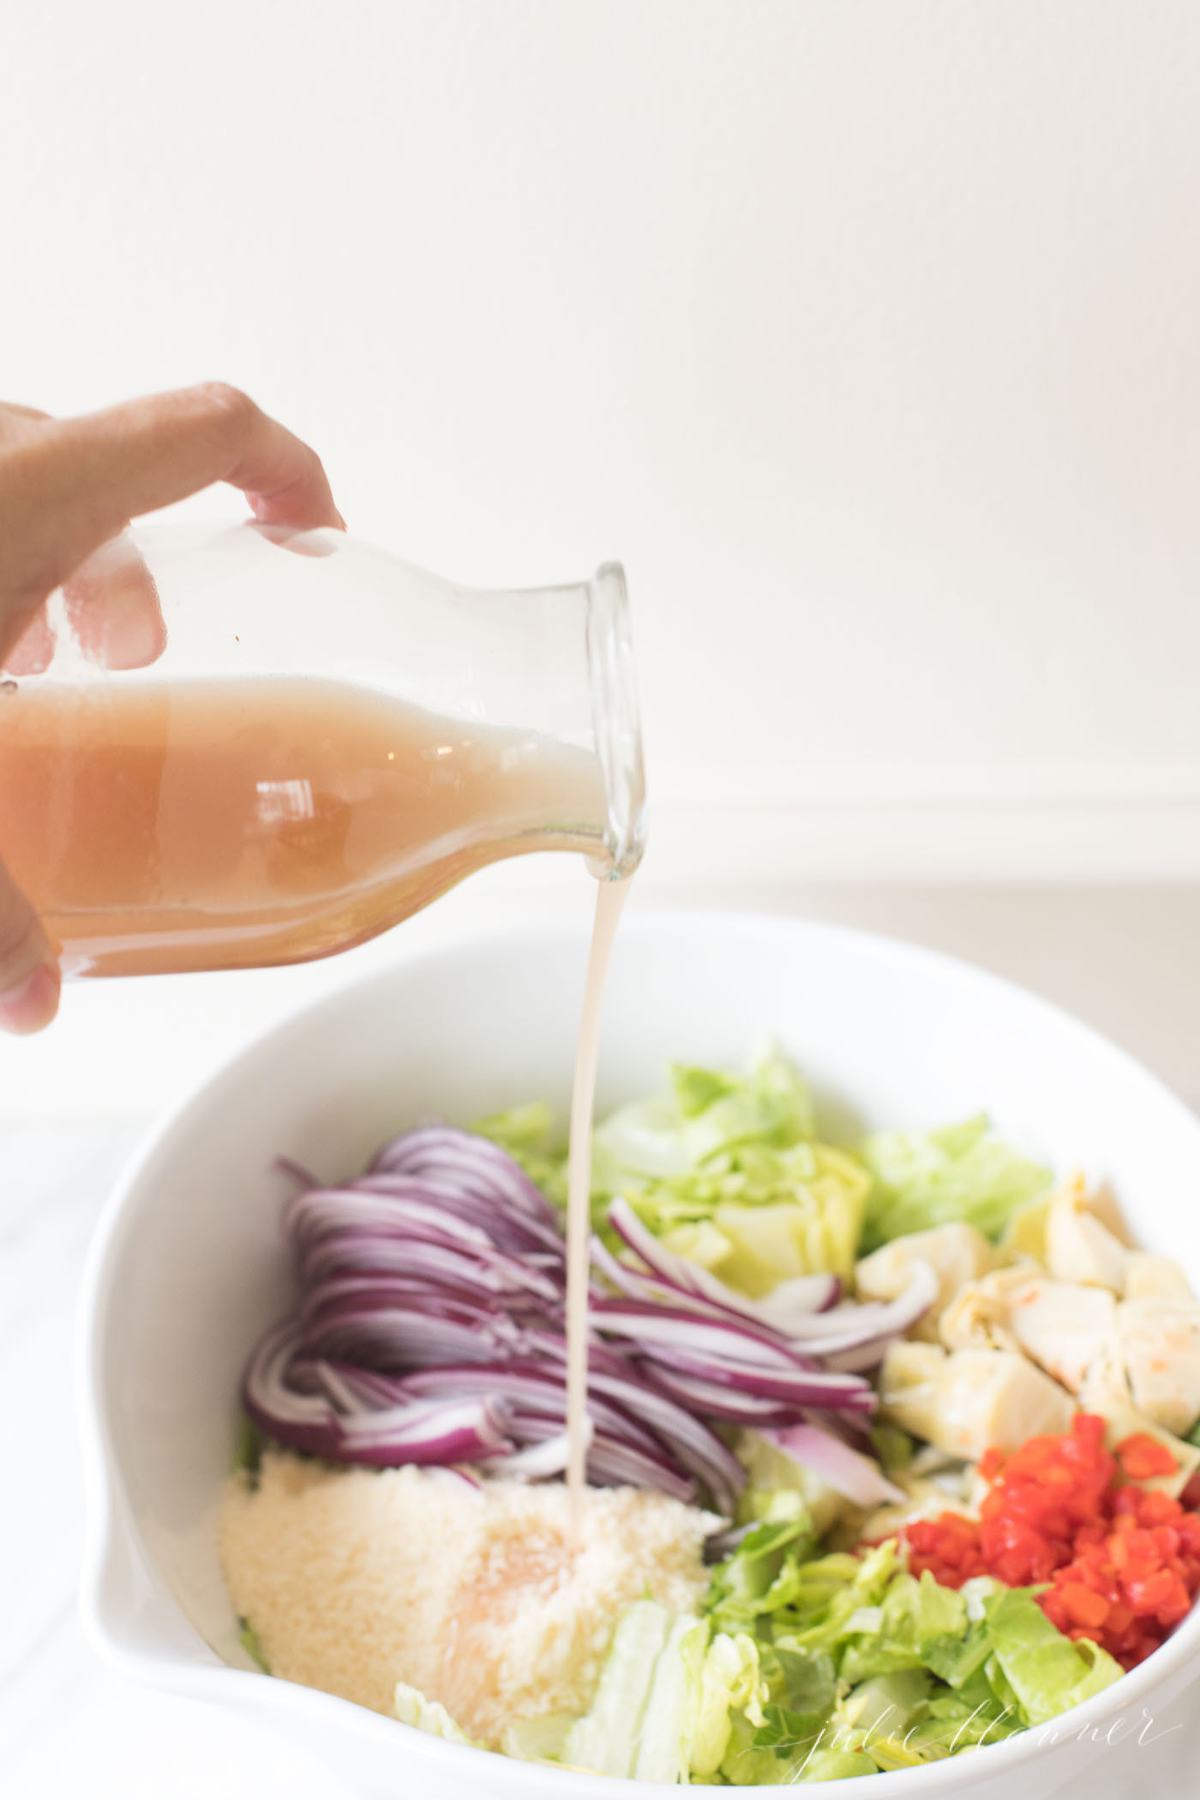 red wine vinaigrette being drizzled over a bowl of salad